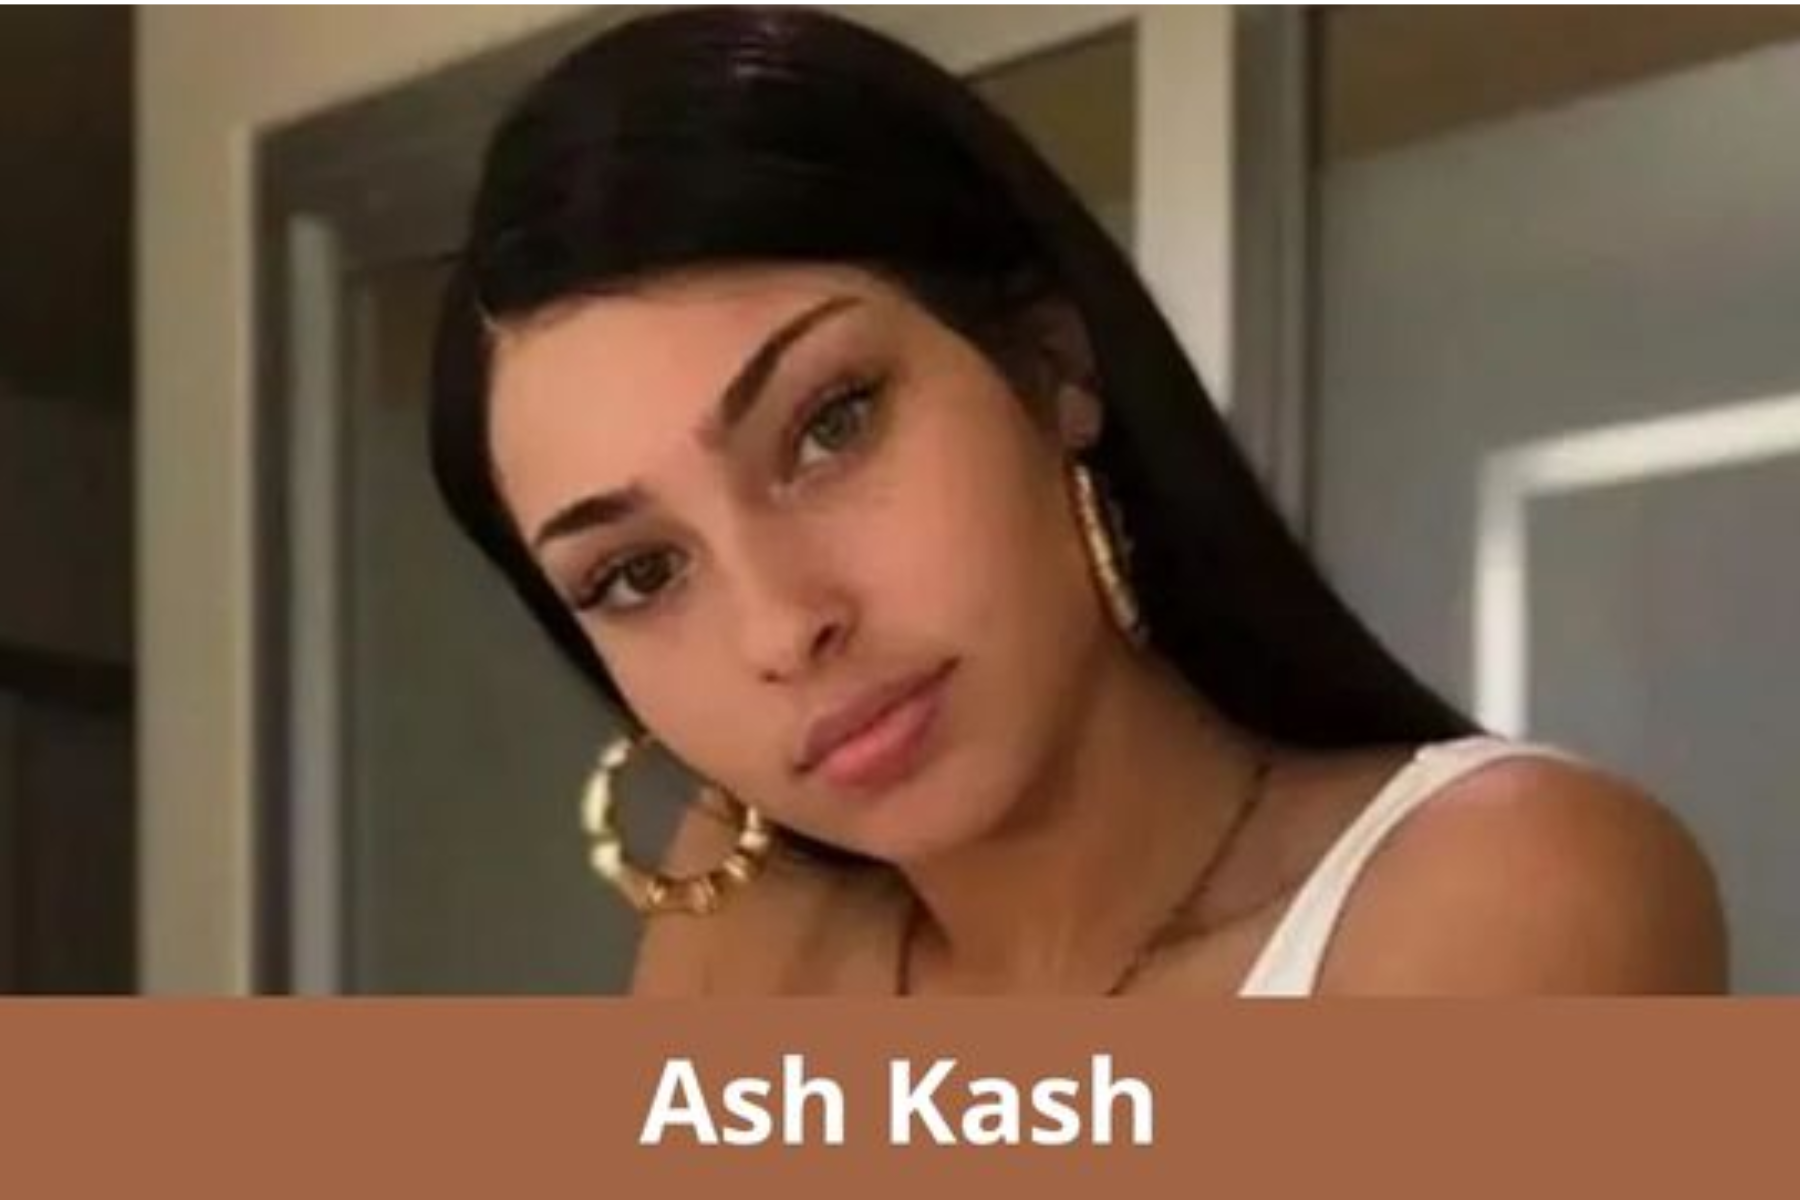 Ash Kash is wearing a massive round ring and is looking directly at the camera